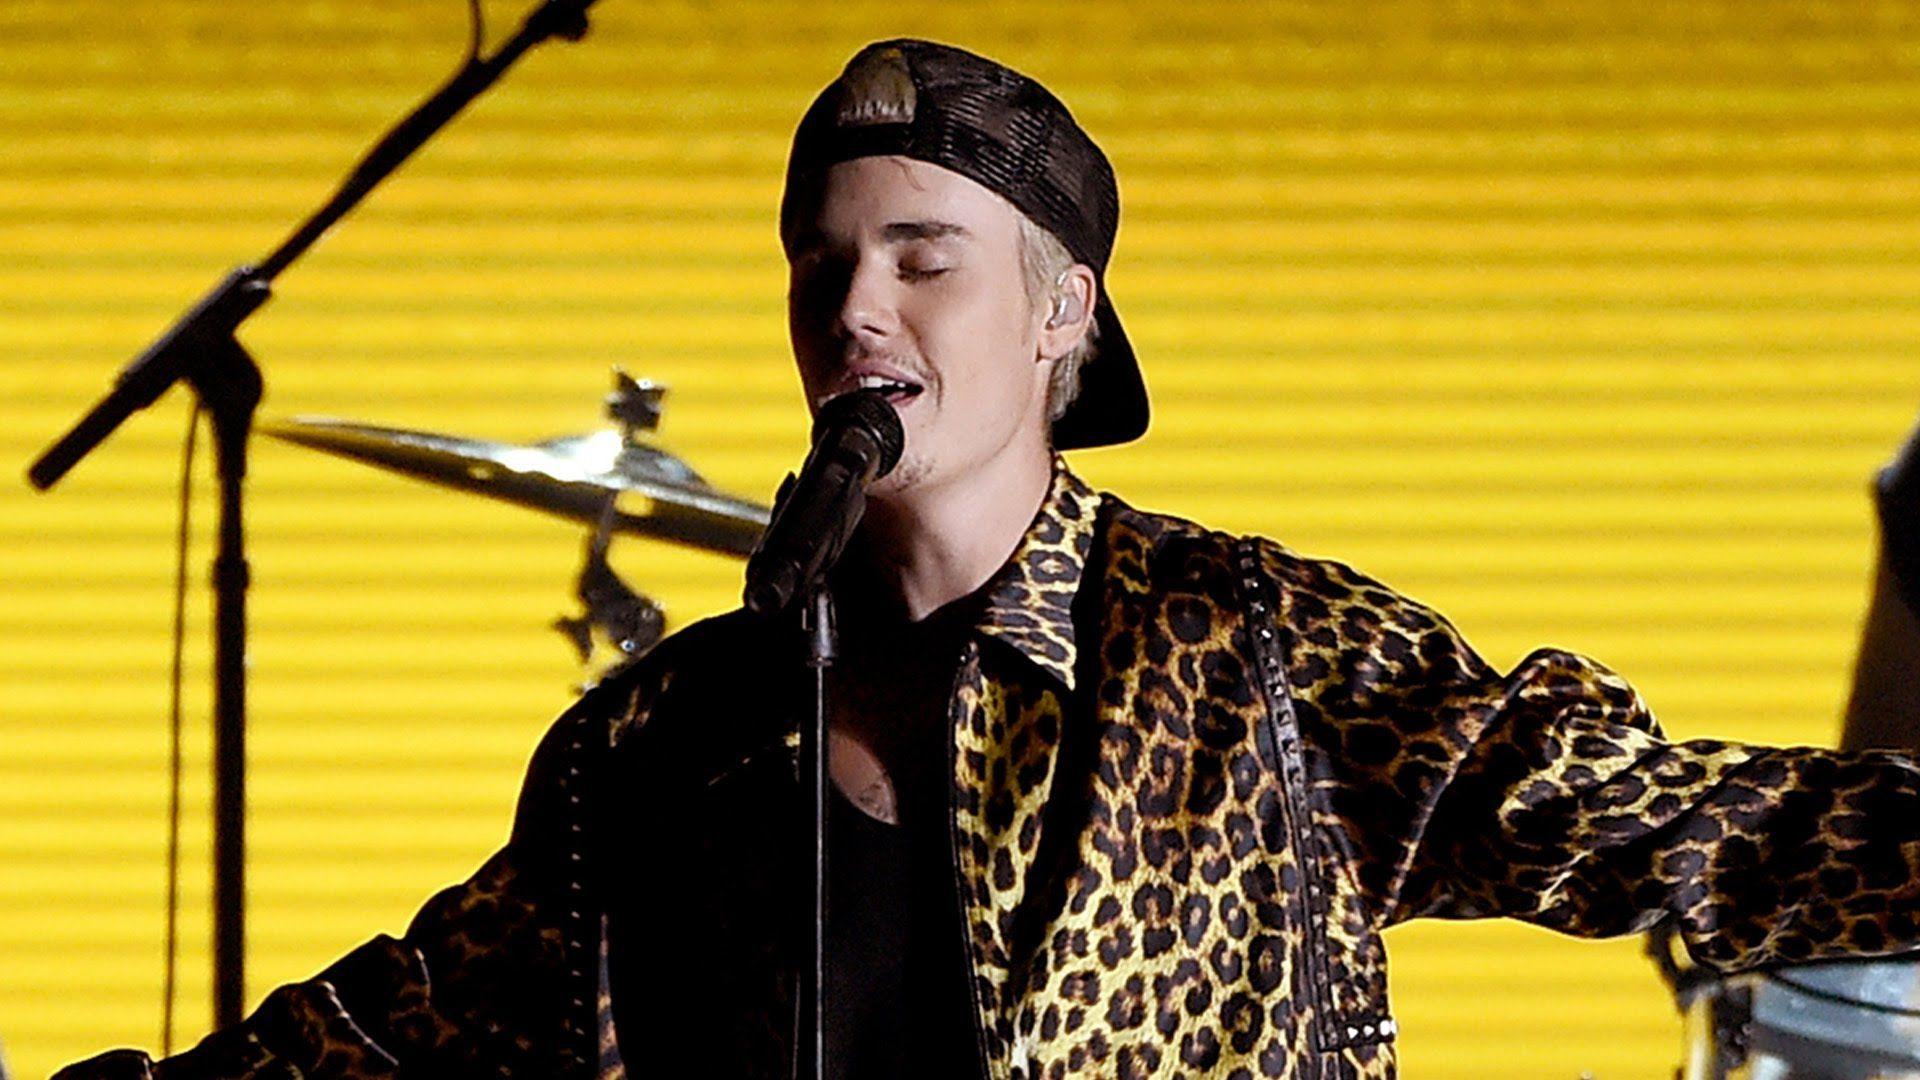 Justin Bieber 'Where Are U Now' & 'Love Yourself' Performance at